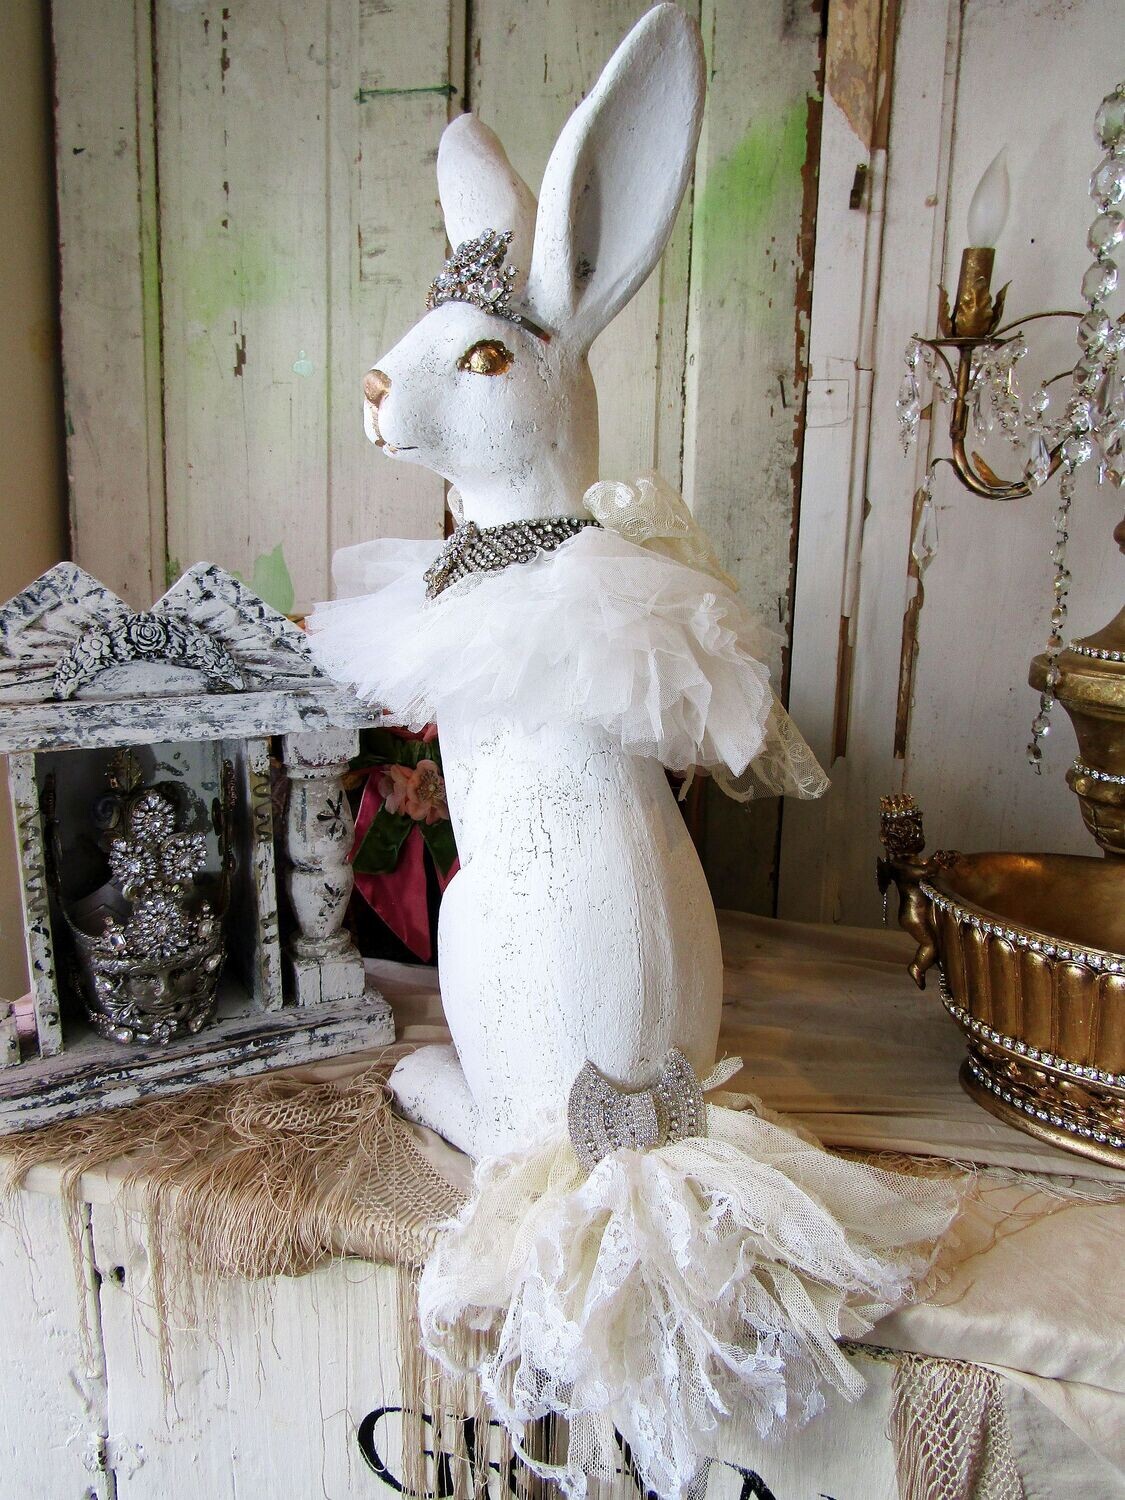 Large tall white rabbit statue with crown and embellished in a collar, storybook style hare. 24" tall